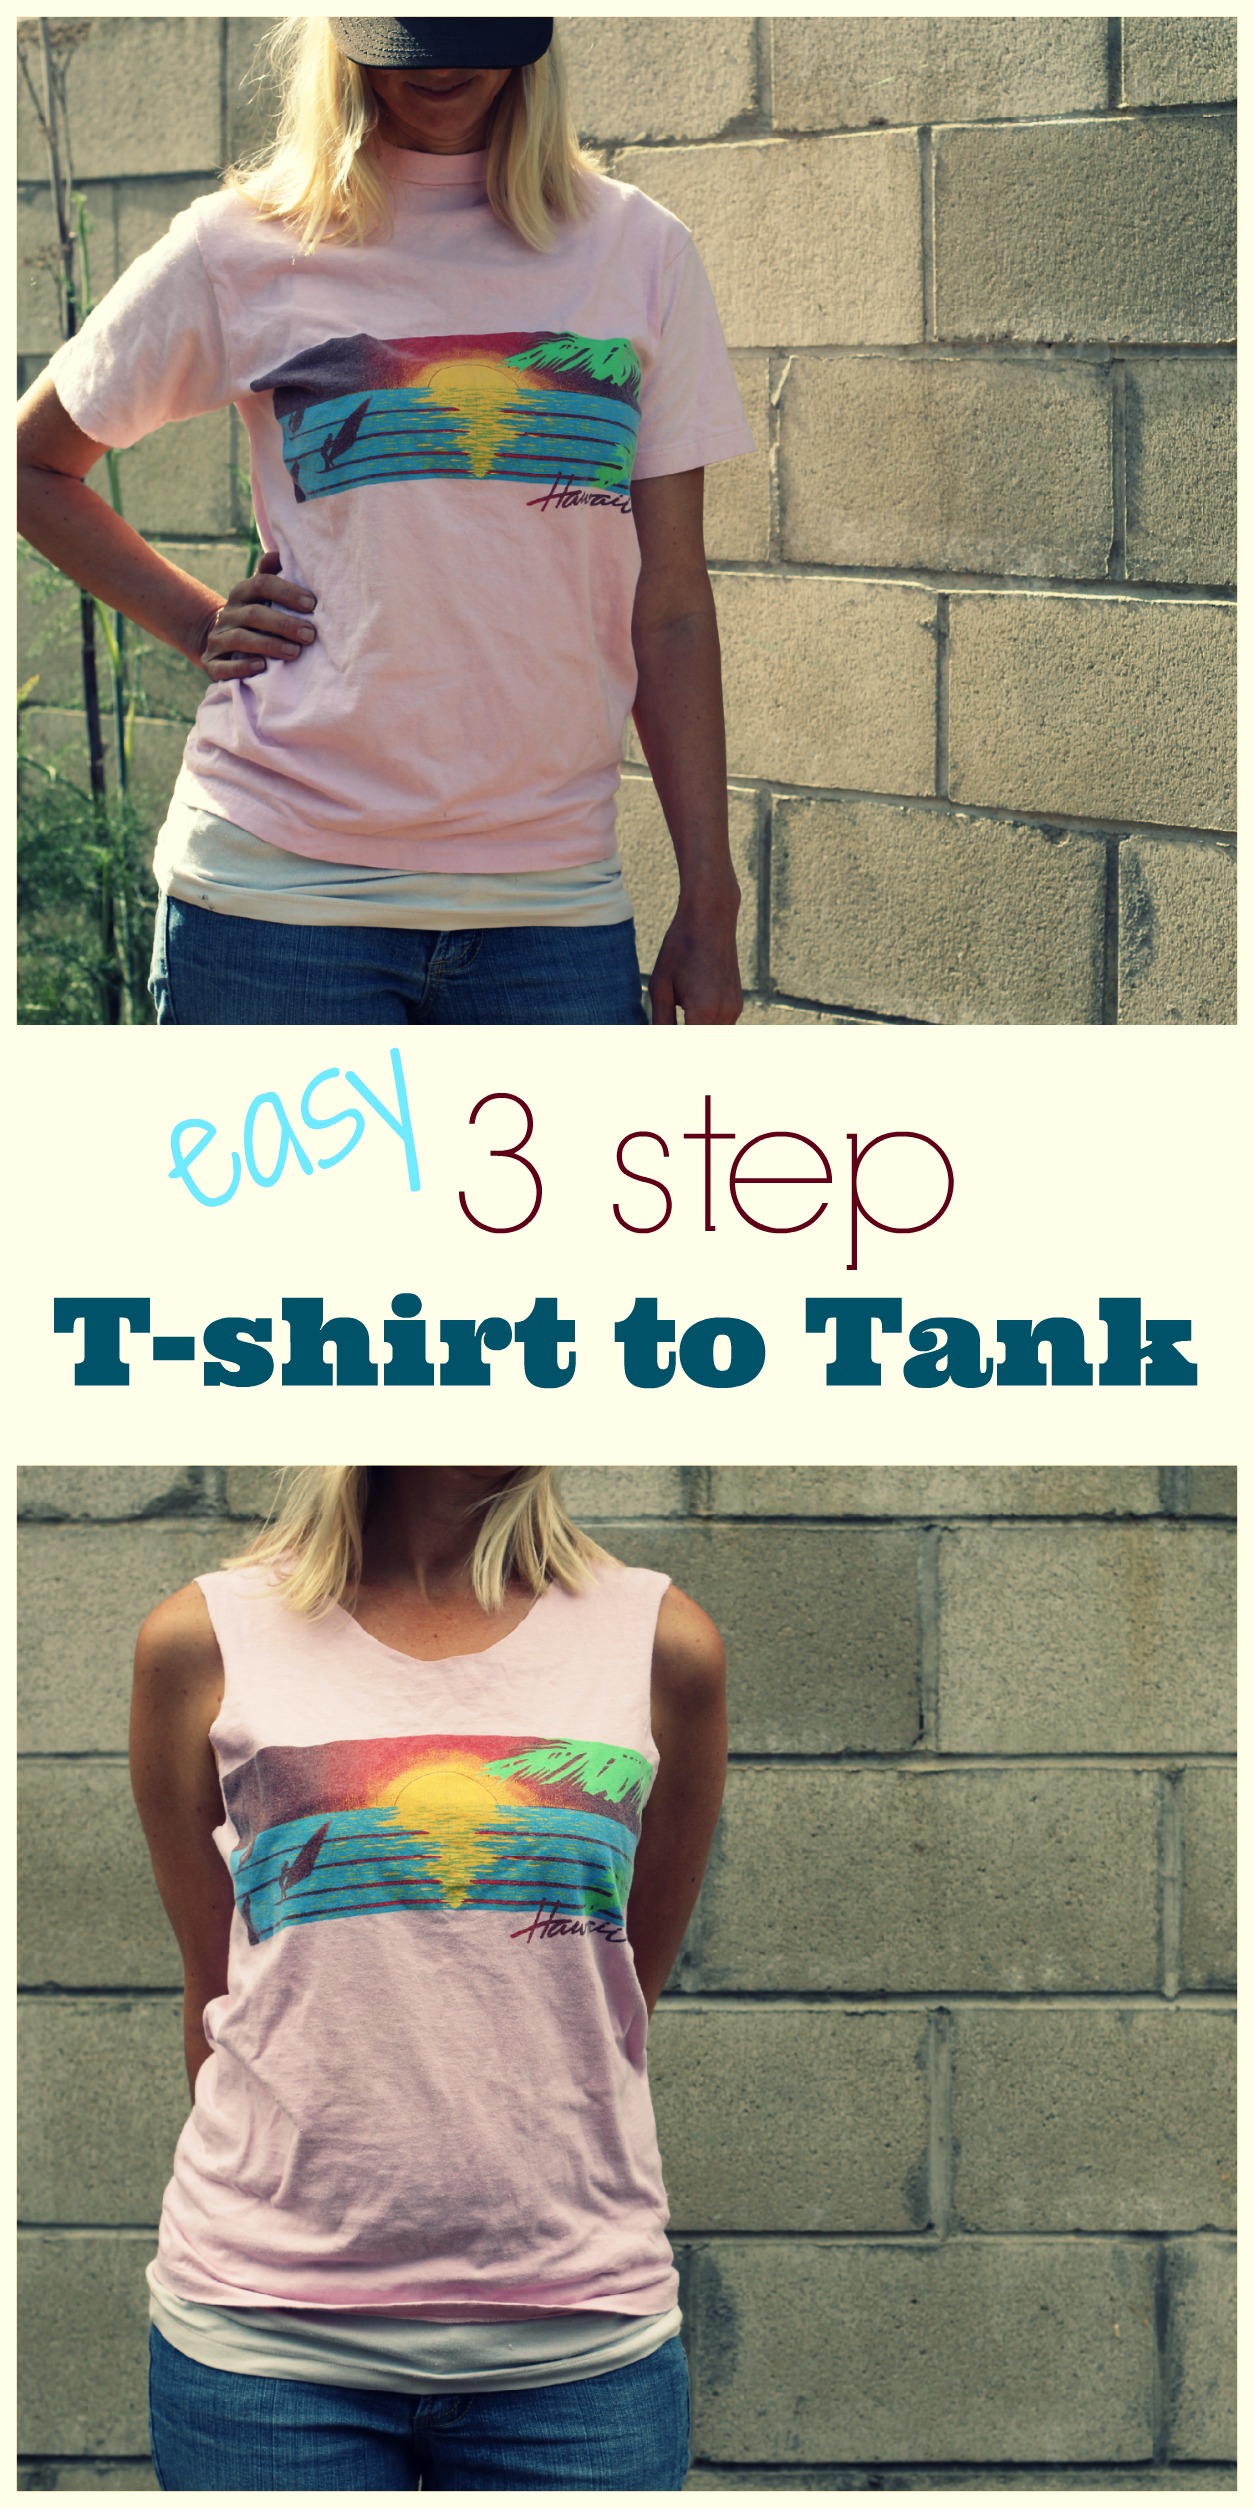 How To Make Cool Tank Tops Out Of T-shirts?